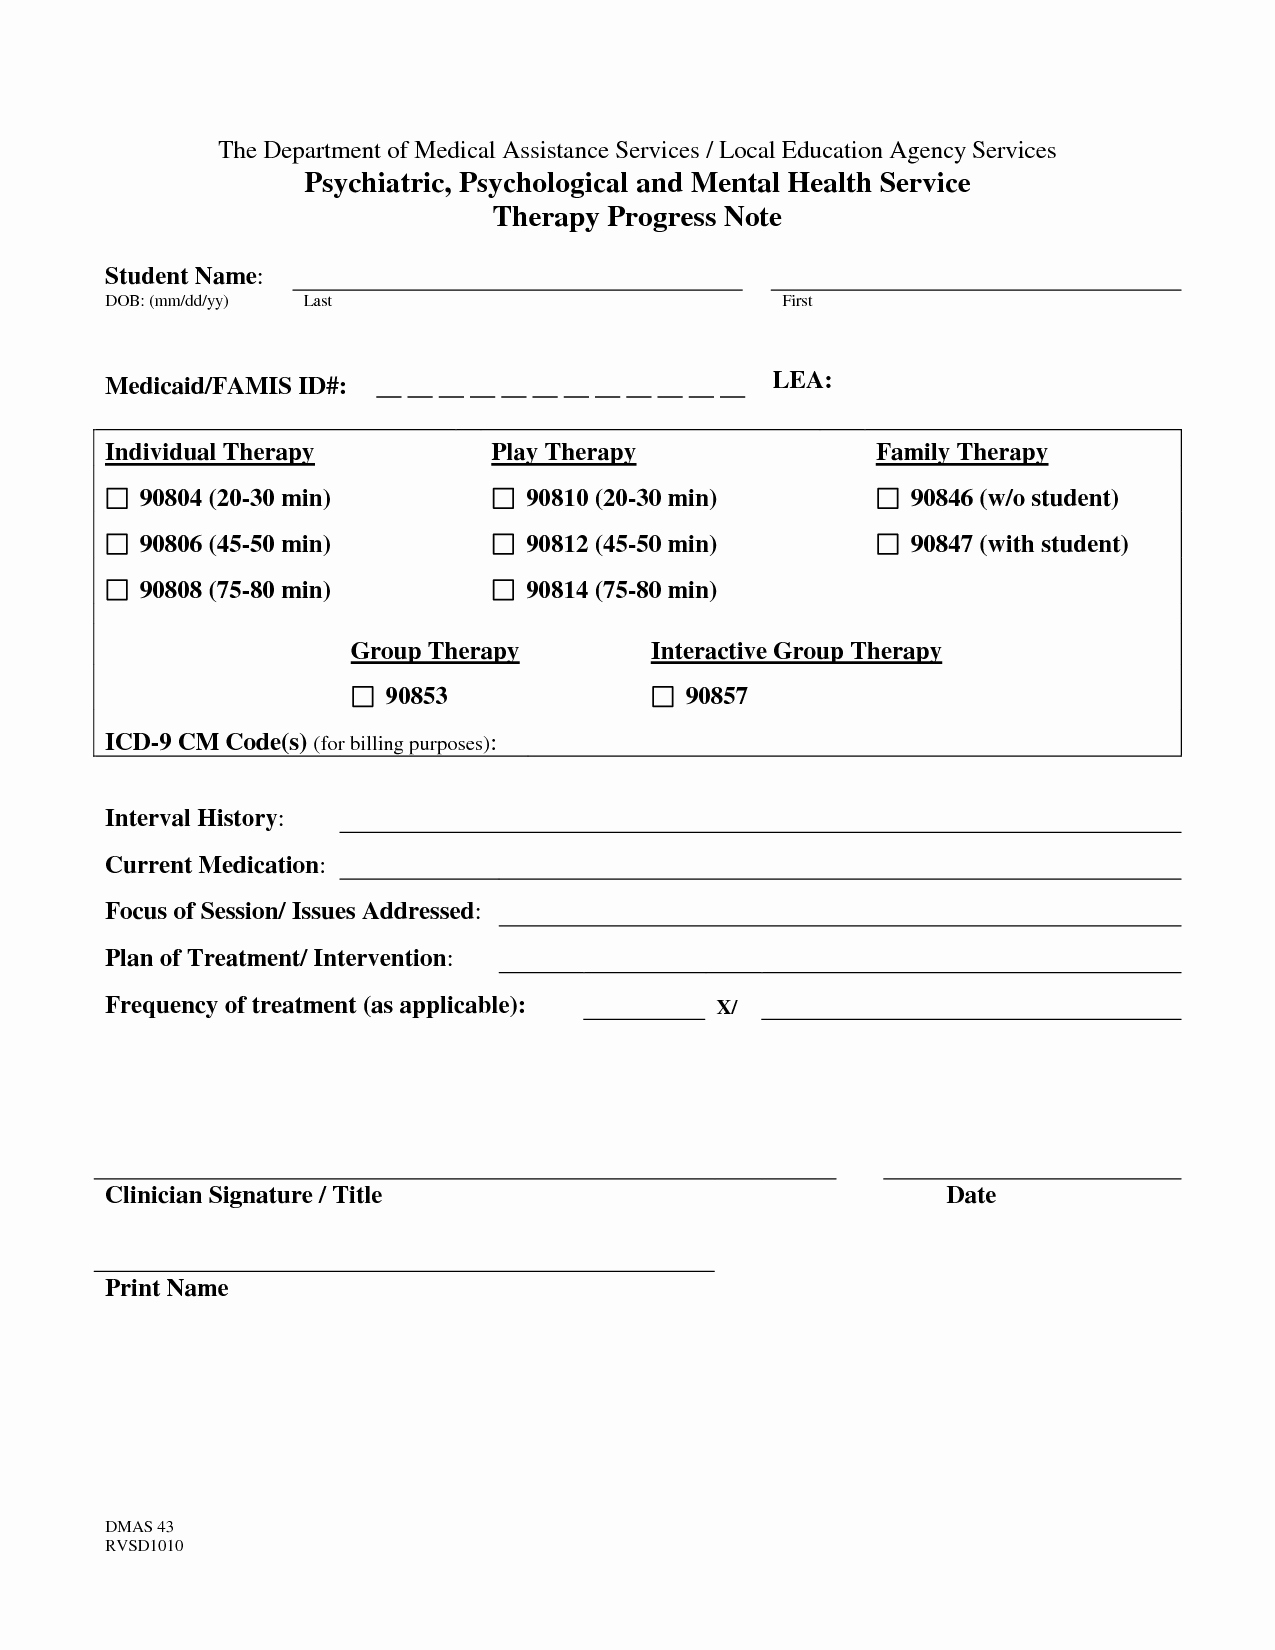 Psychotherapy Progress Notes Template Best Of therapy Progress Note Template 2018